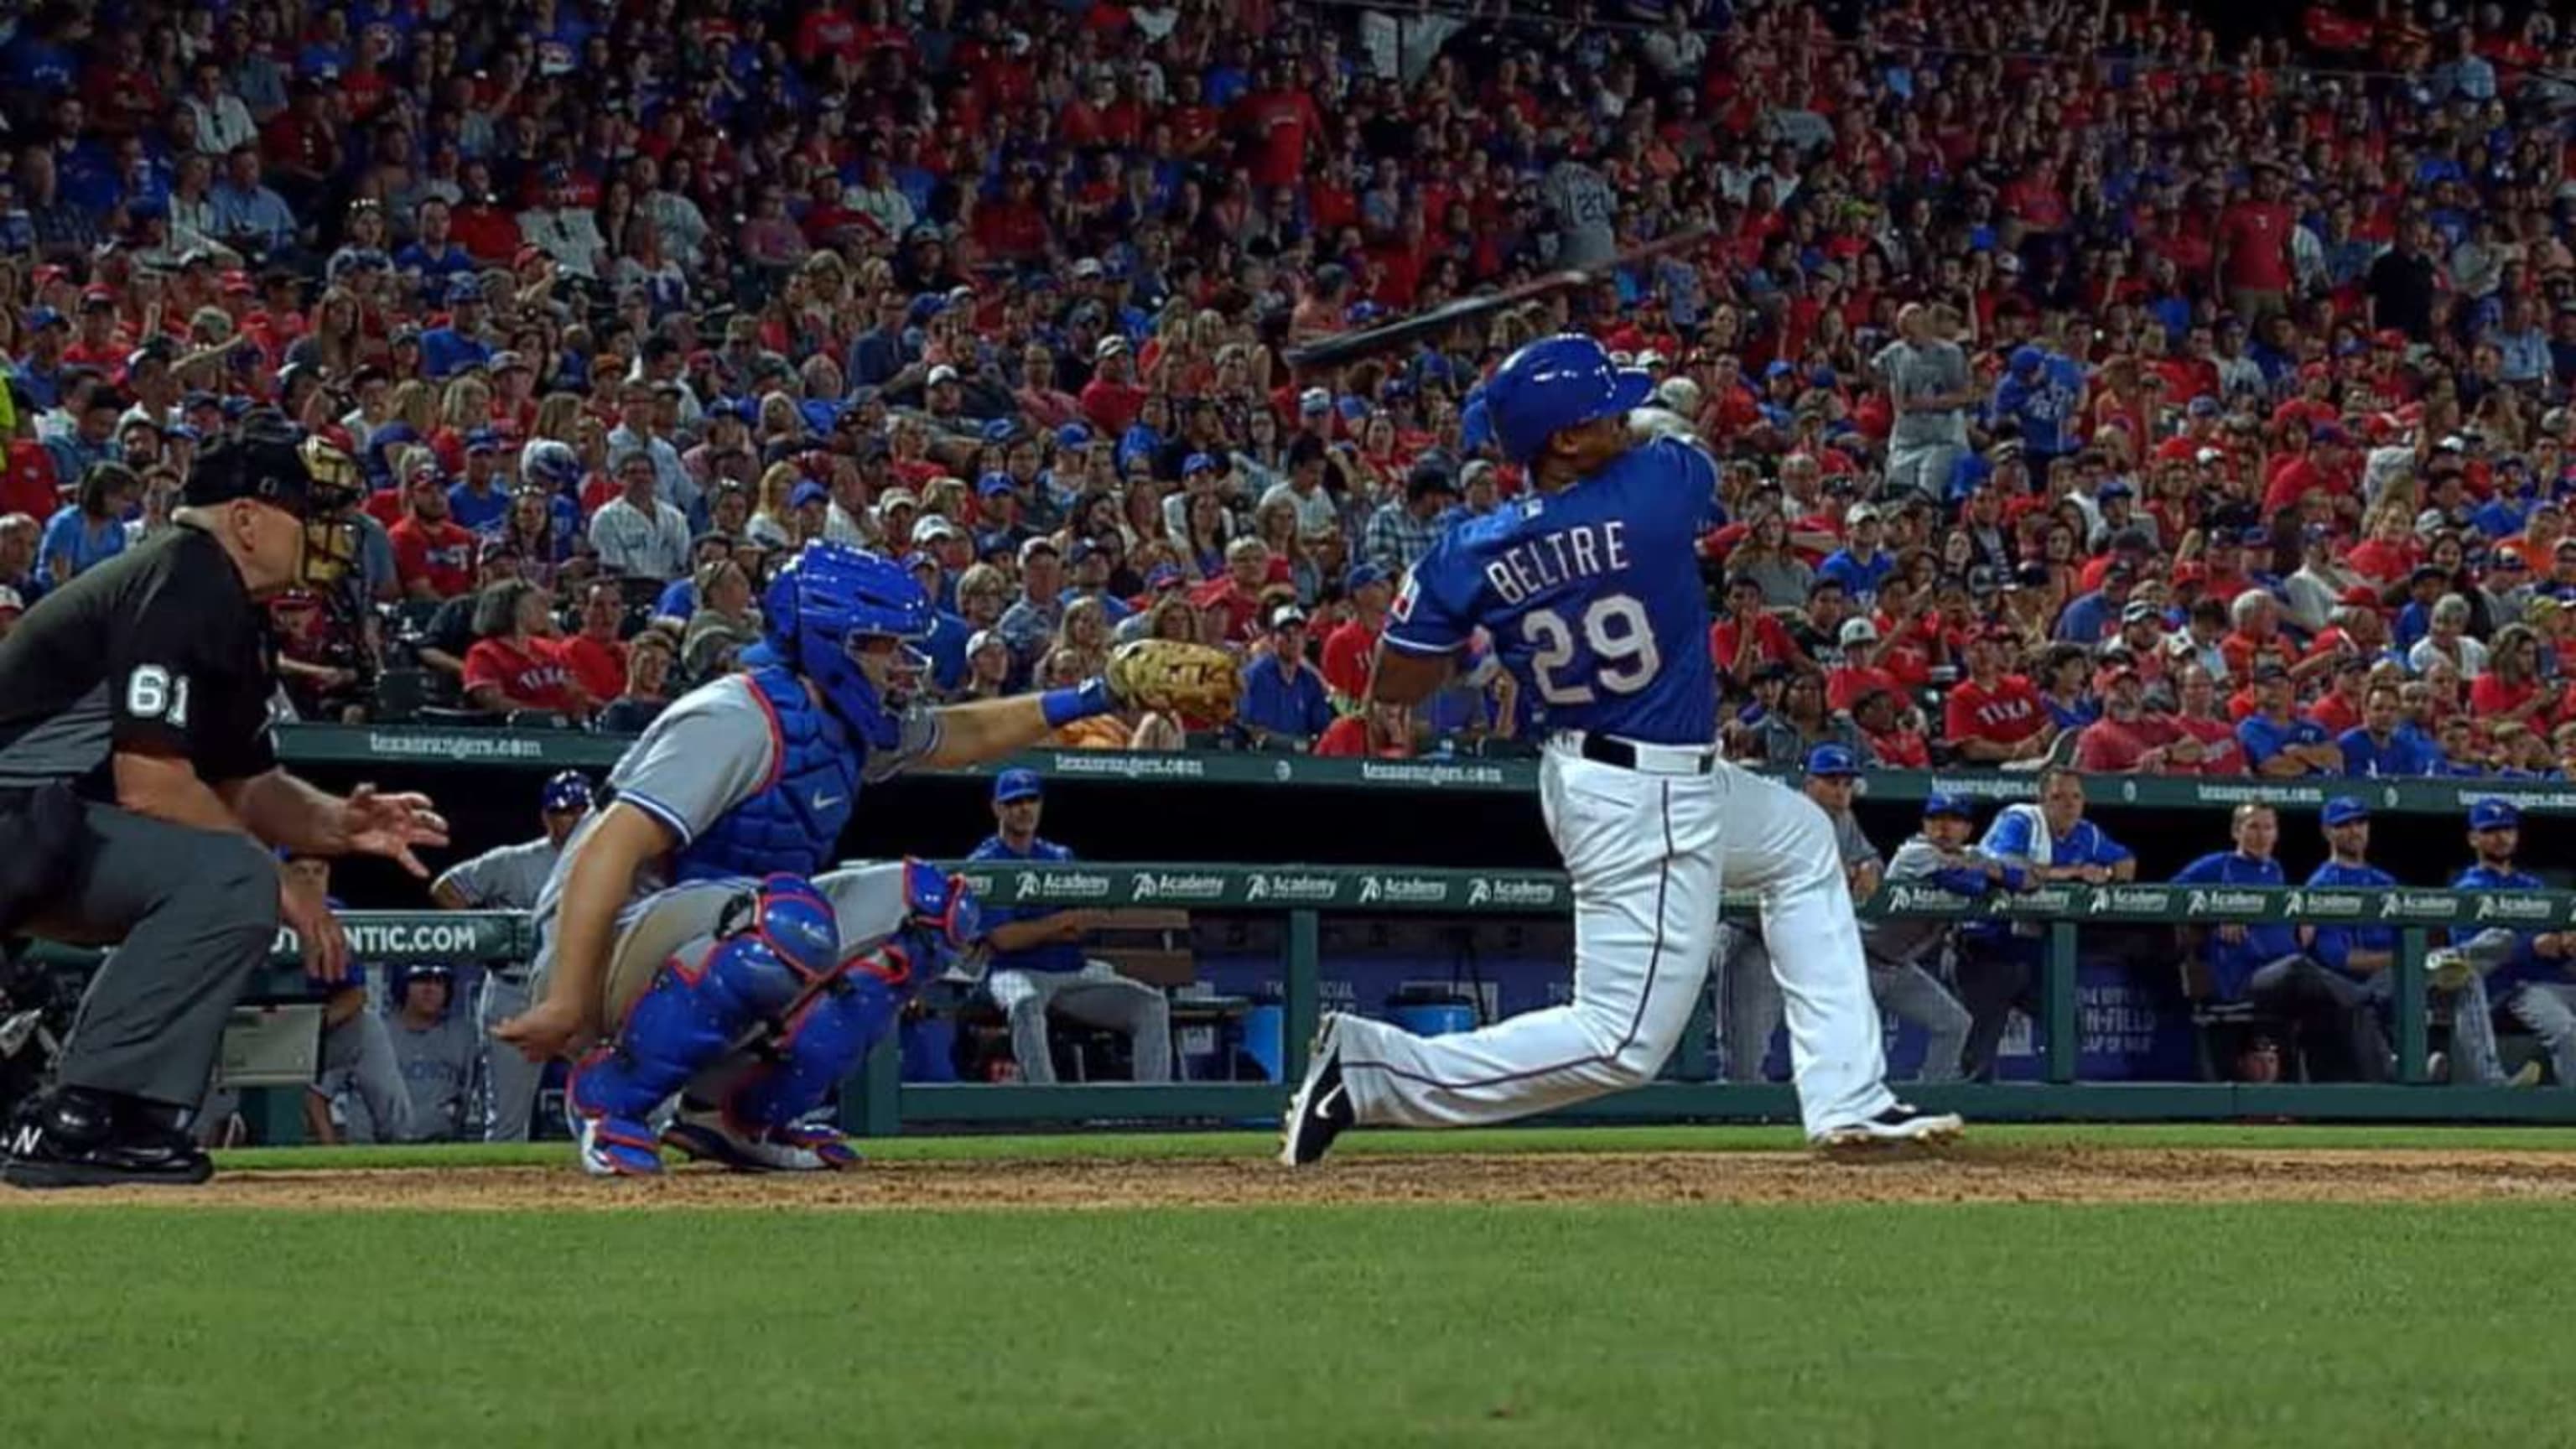 Adrian Beltre swung so hard he fell to a knee  and then he stayed there  and struck a pose